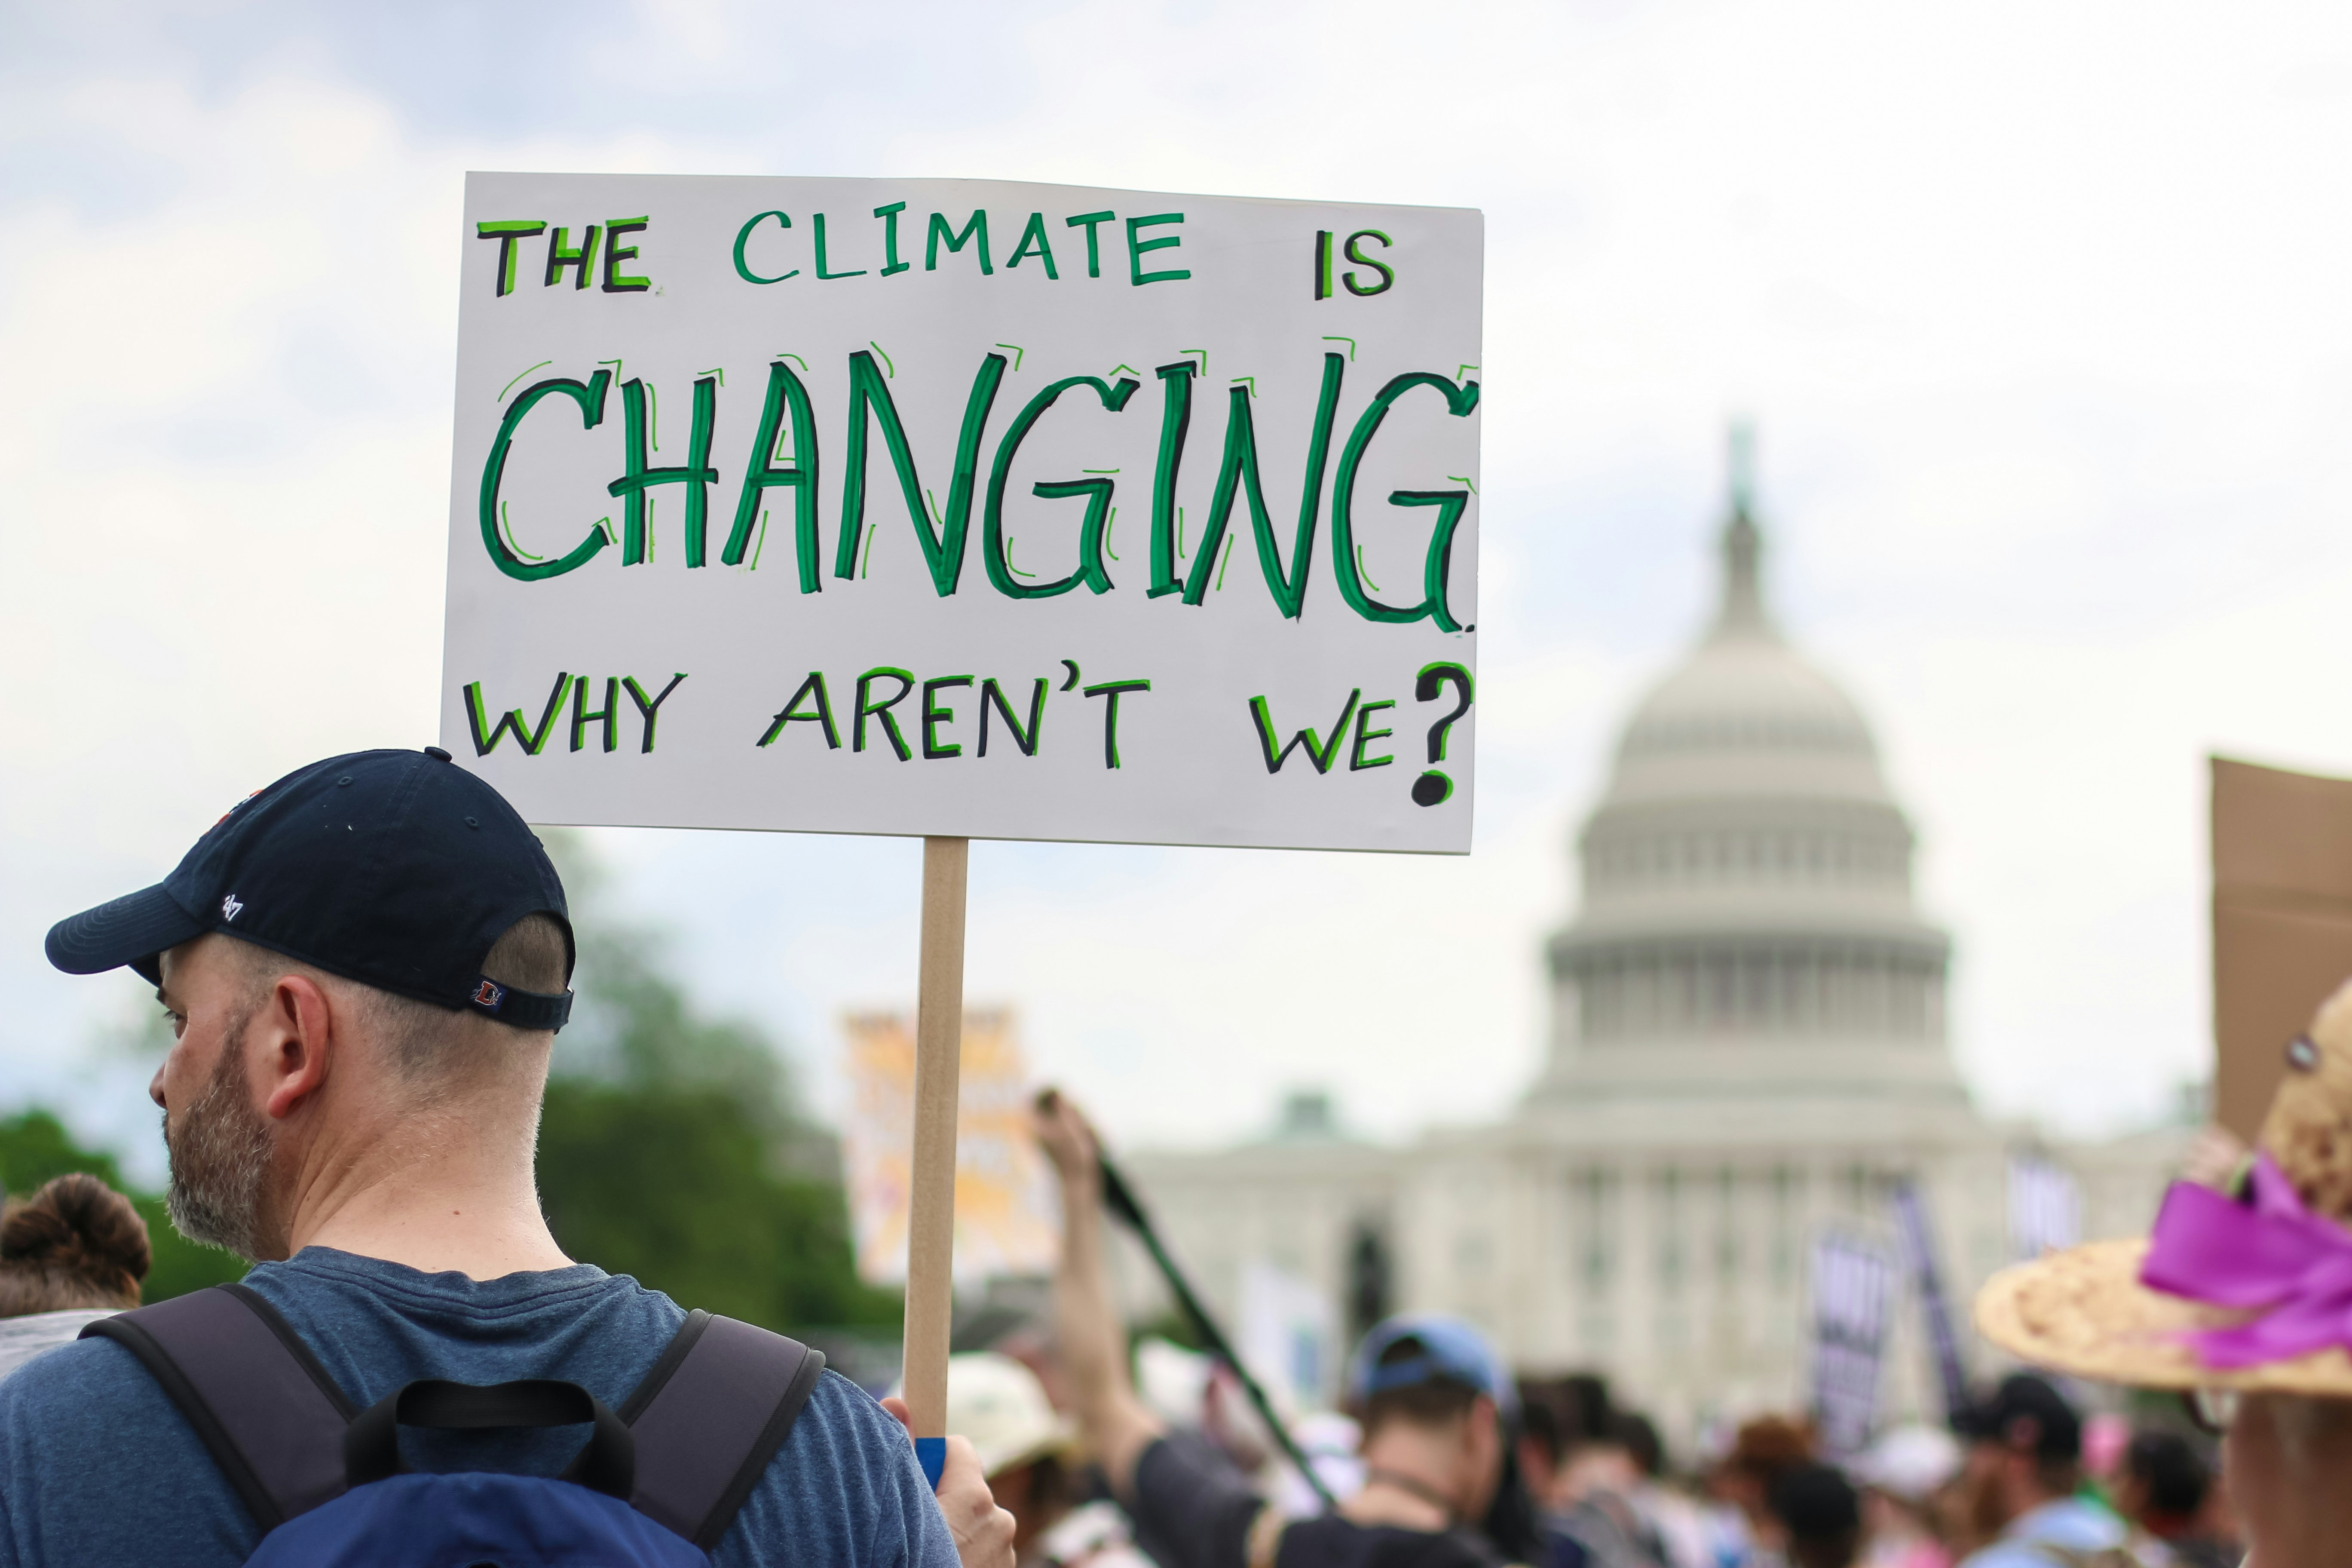 A man wearing a baseball cap holds a sign saying 'the climate is changing, why aren't we?'. The US Capital Building is in the background, out of focus.